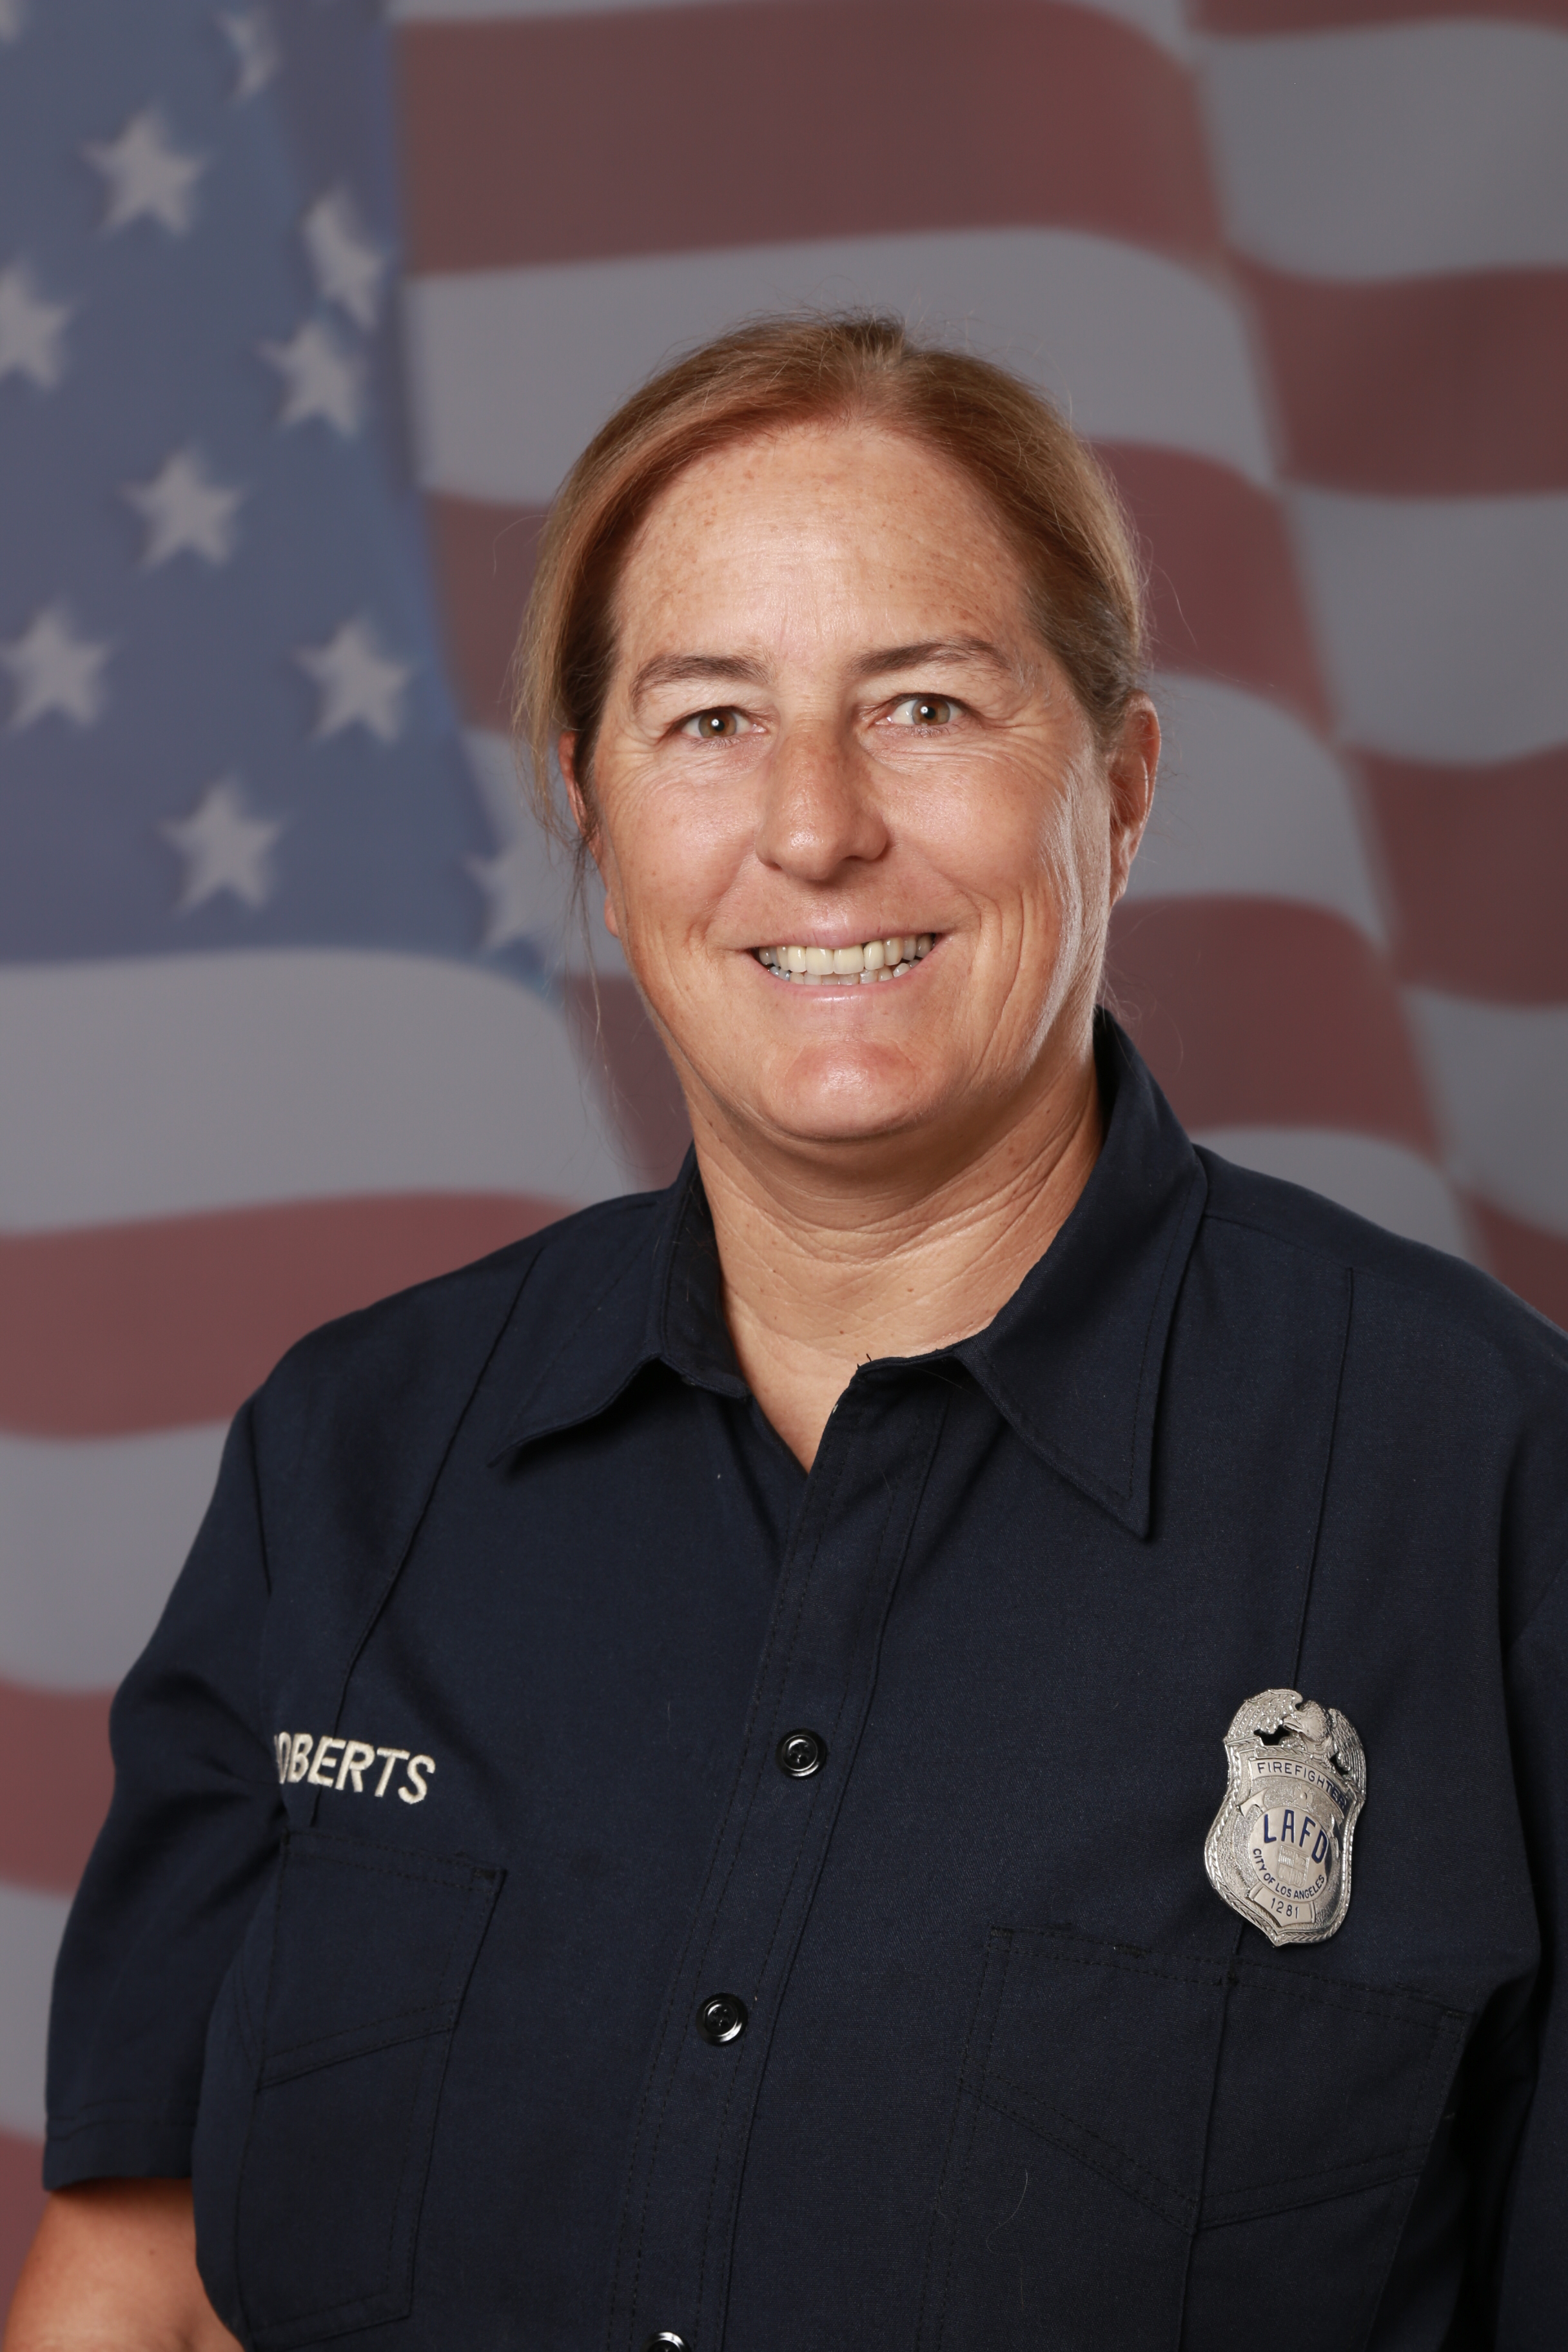 Los Angeles Fire Department Firefighter/Paramedic Valerie L. Roberts